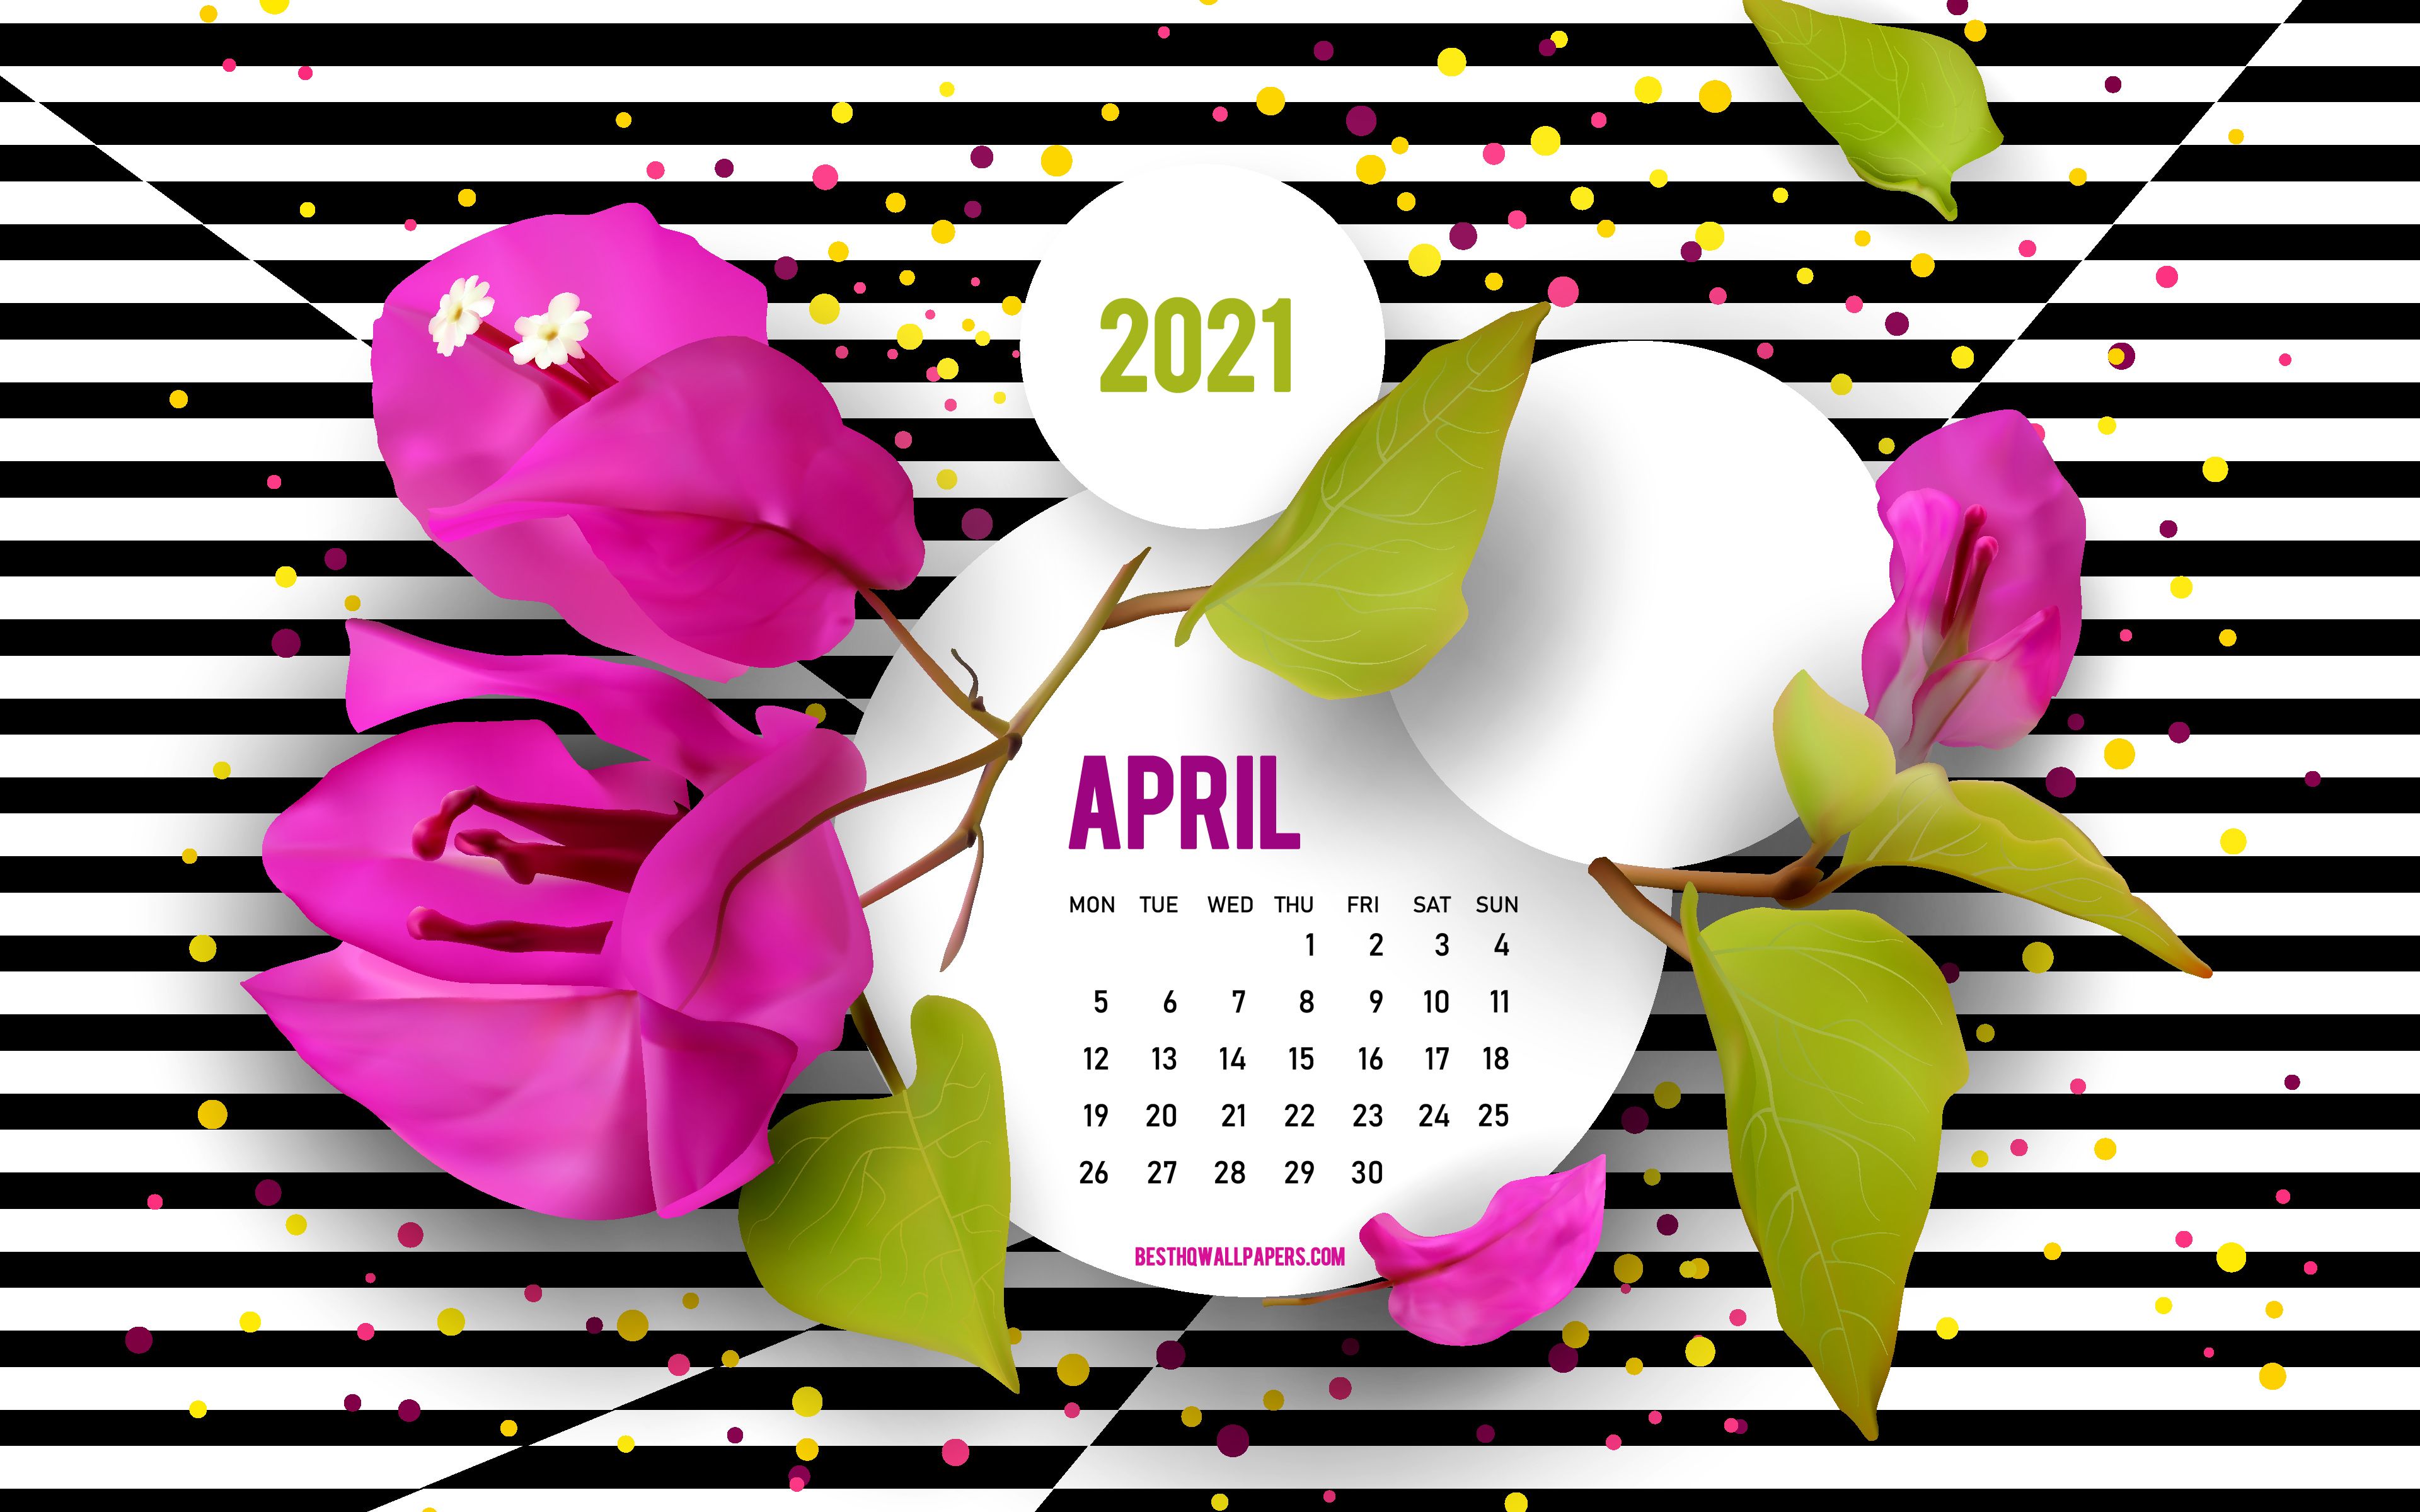 Download wallpaper 2021 April Calendar, background with flowers, creative art, April, 2021 spring calendars, black and white striped background, April 2021 Calendar, purple flowers for desktop with resolution 3840x2400. High Quality HD picture wallpaper